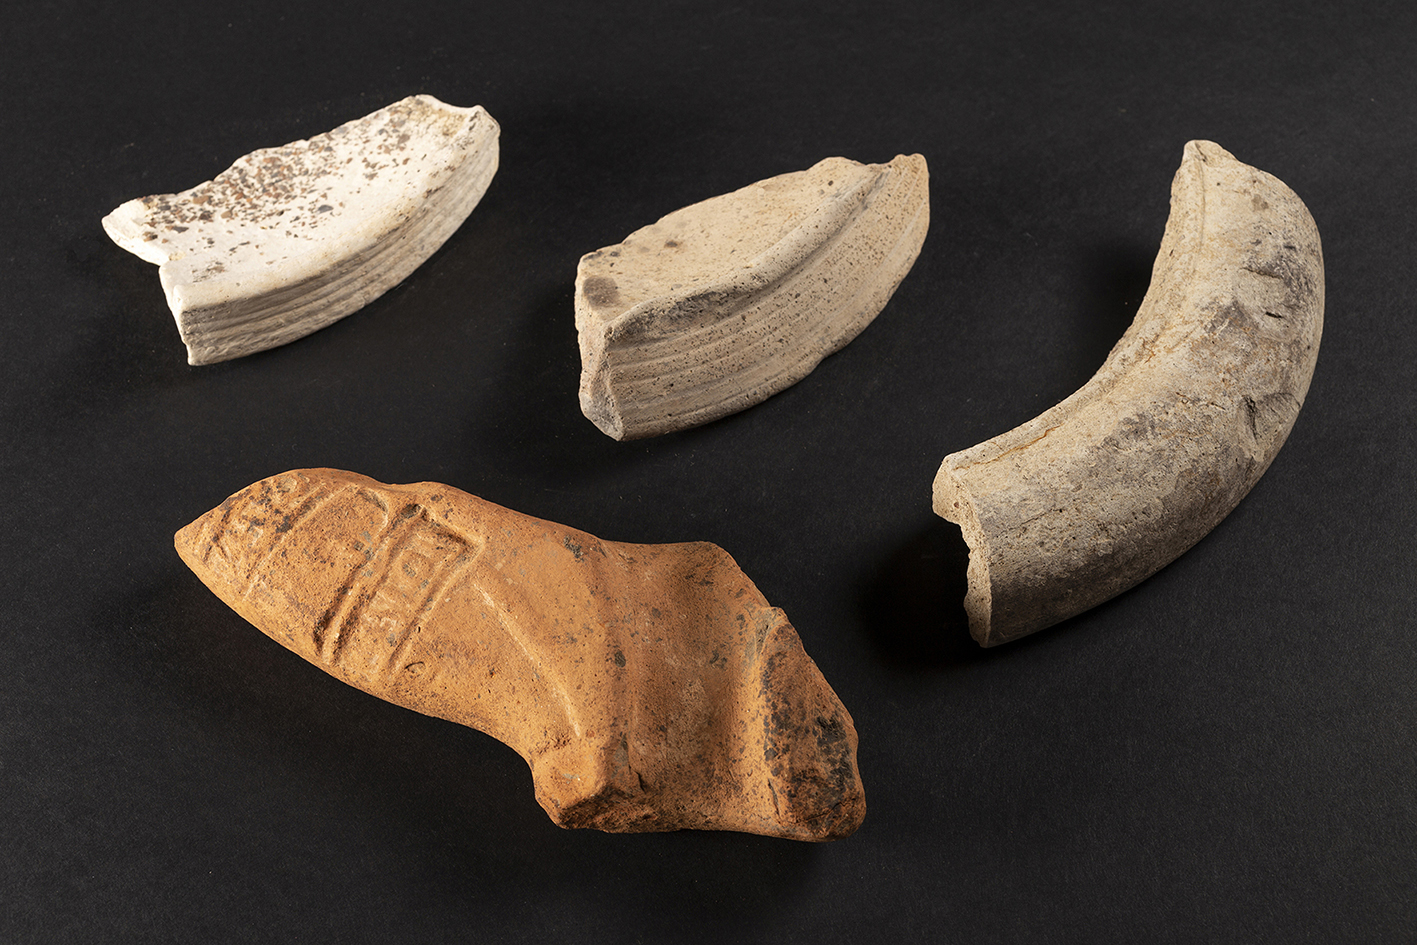 Roman finds from the Bedale site